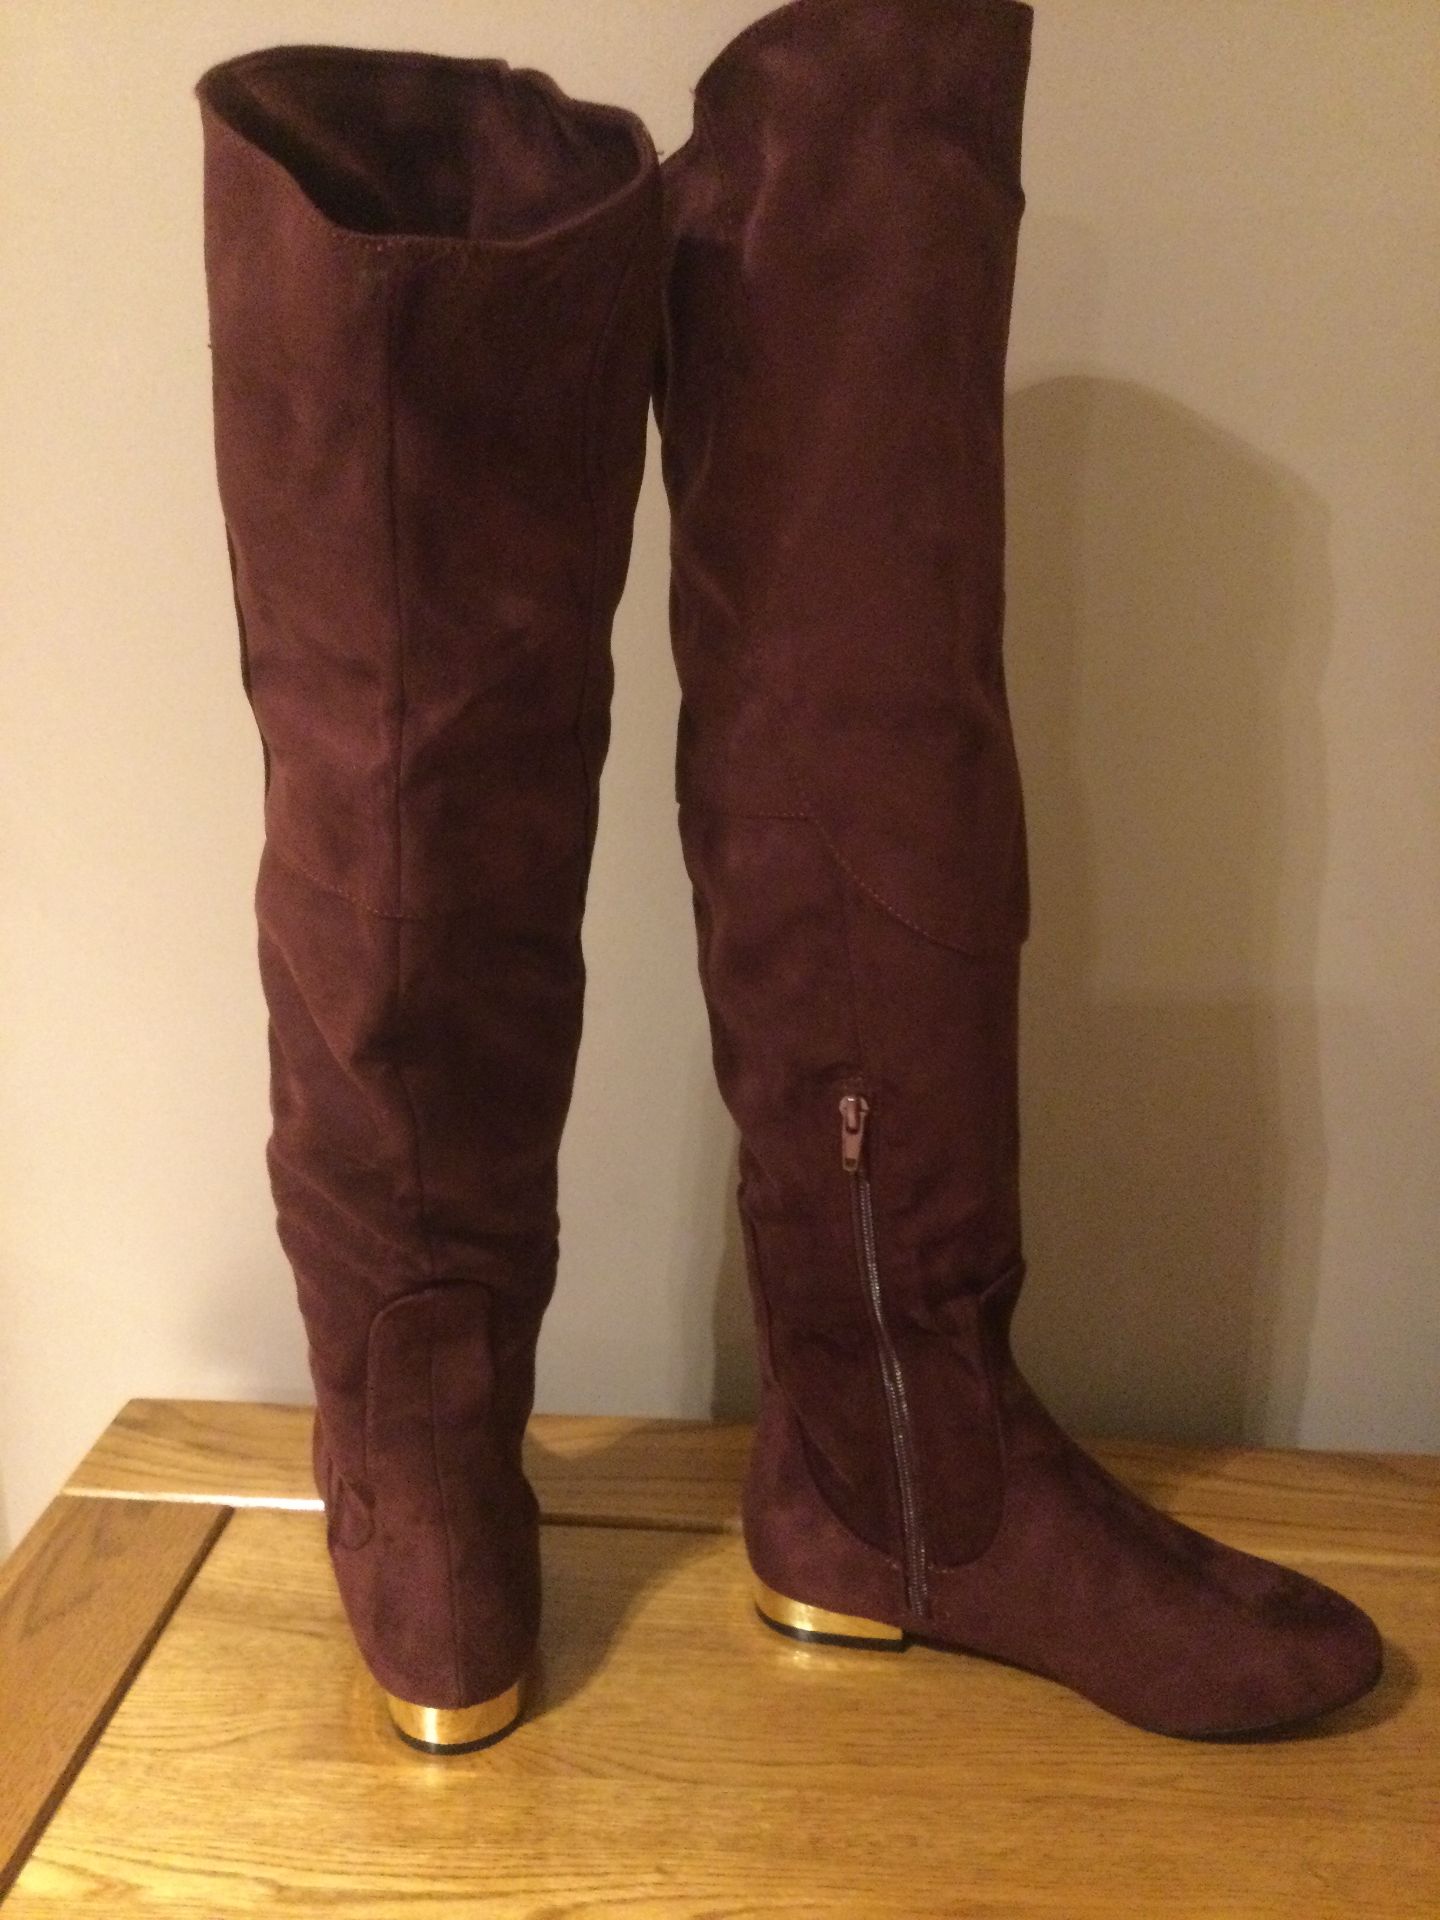 Dolcis “Katie” Long Boots, Low Heel, Size 5, Burgundy - New RRP £55.00 - Image 2 of 7